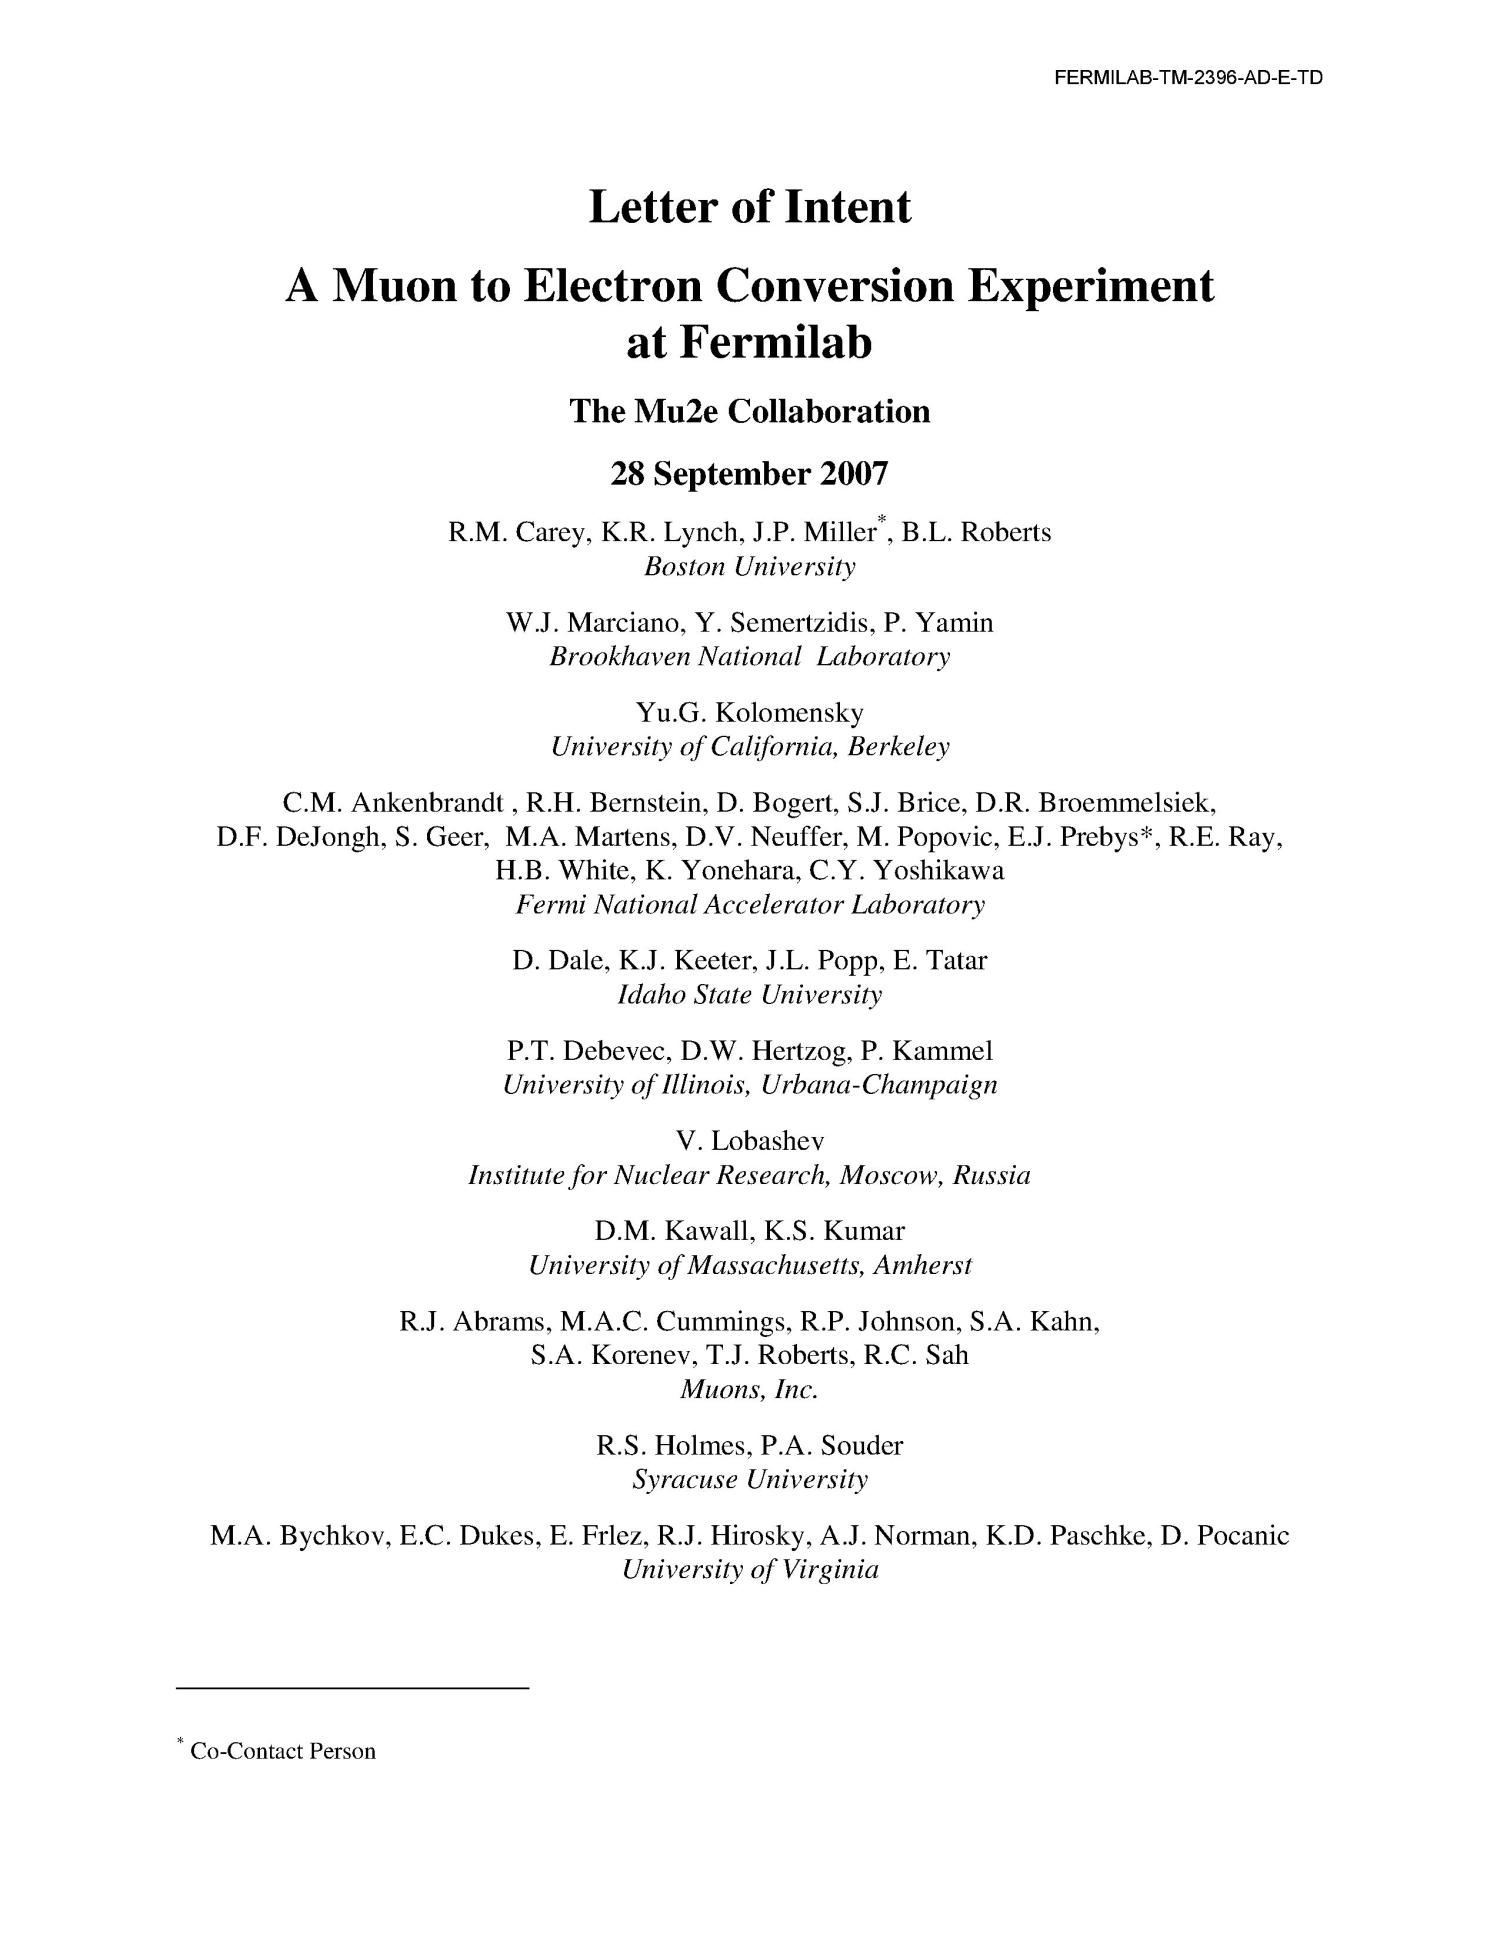 Letter Of Intent A Muon To Electron Conversion Experiment At Fermilab Unt Digital Library